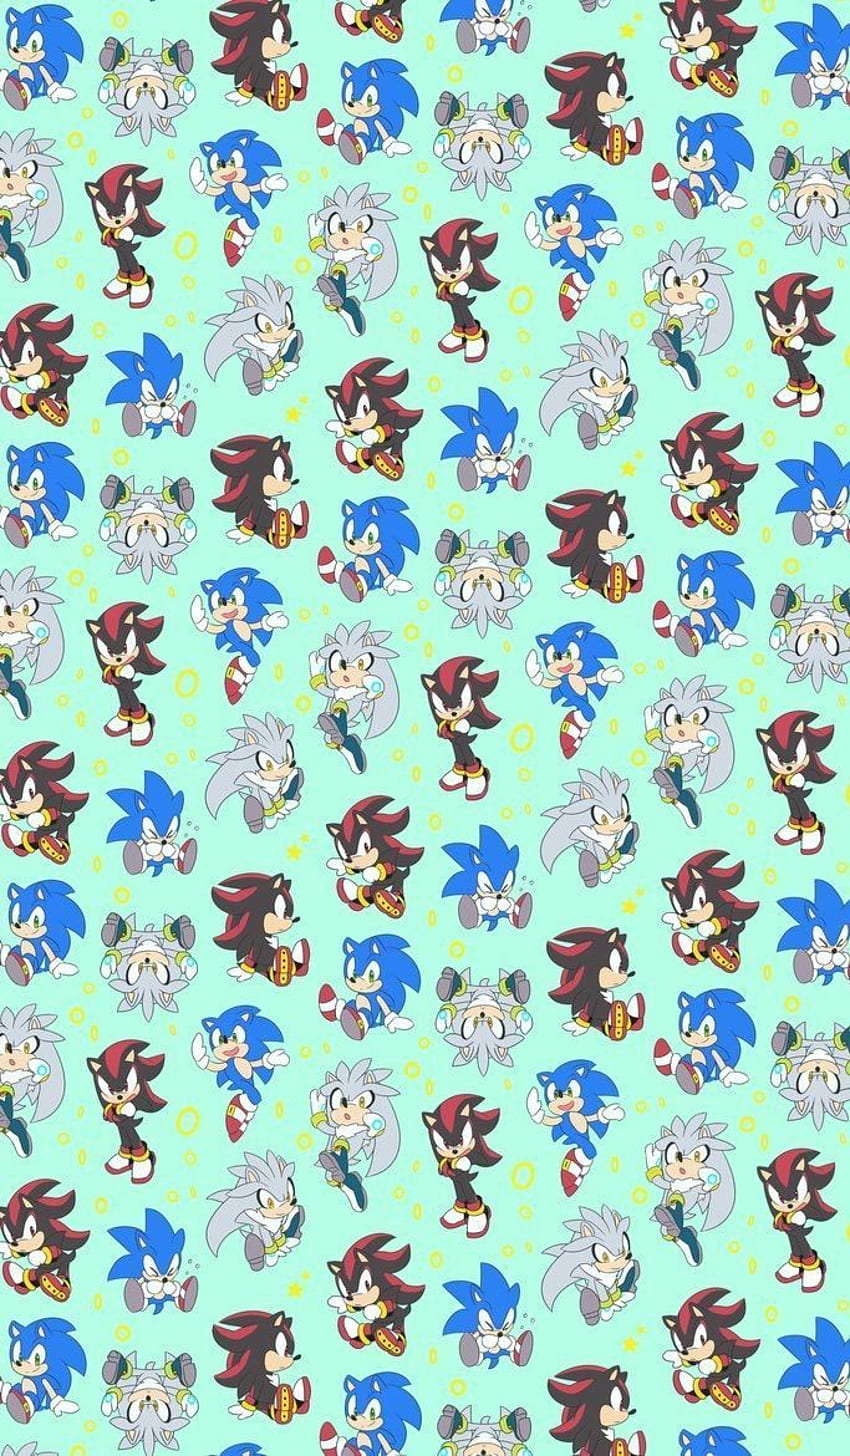 Silver The Hedgehog, Sonic Shadow and Silver the Hedgehog HD phone wallpaper